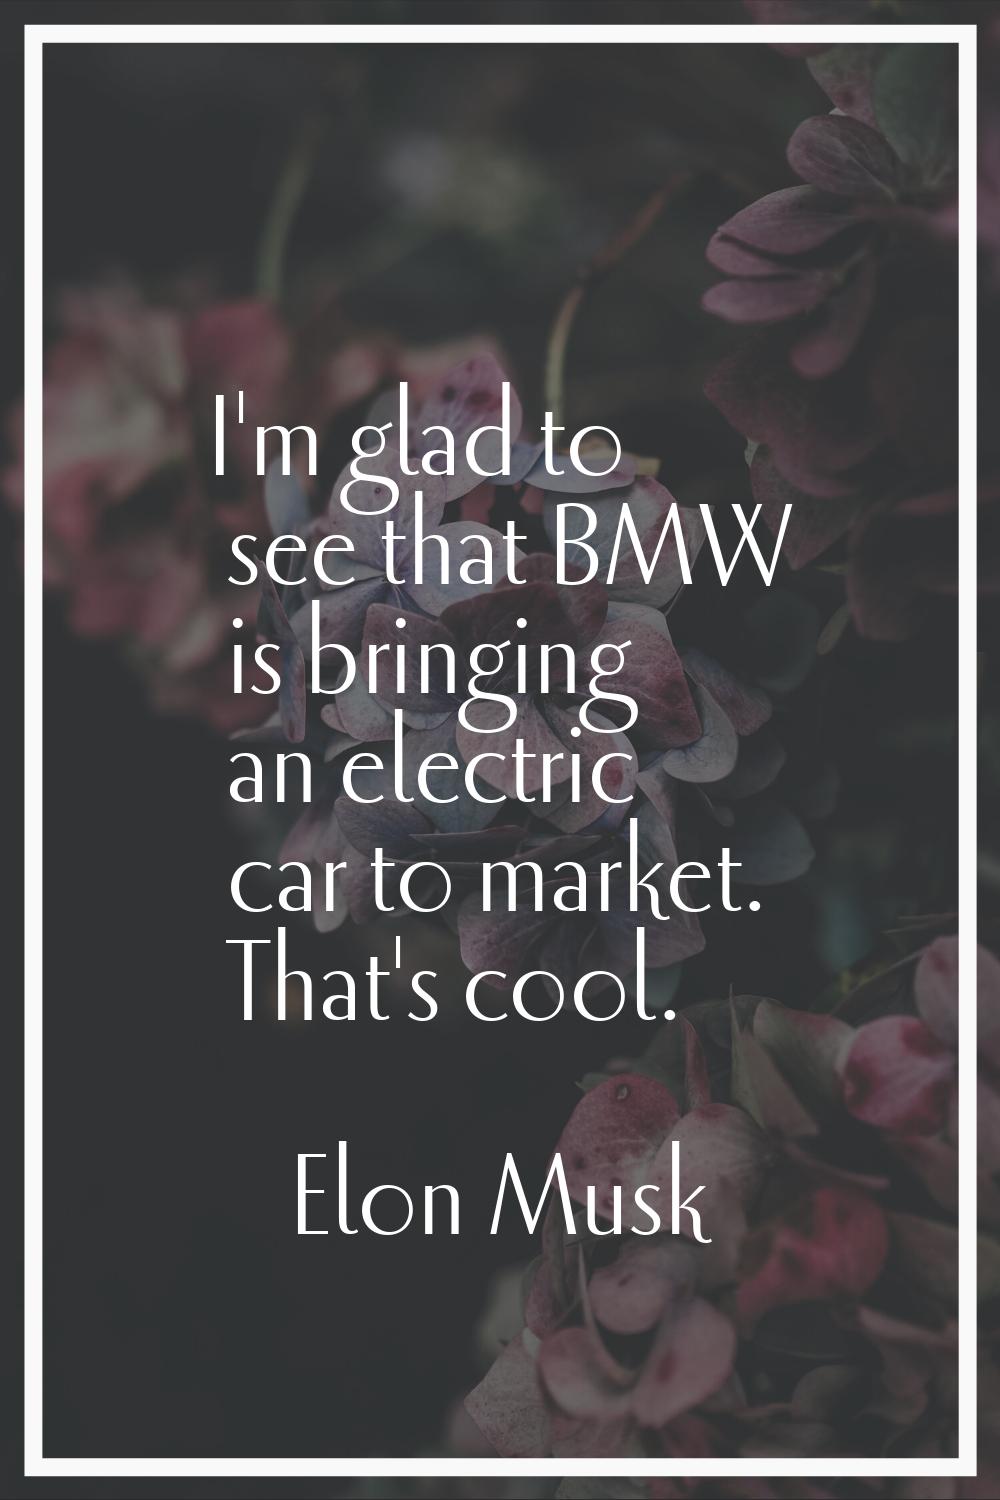 I'm glad to see that BMW is bringing an electric car to market. That's cool.